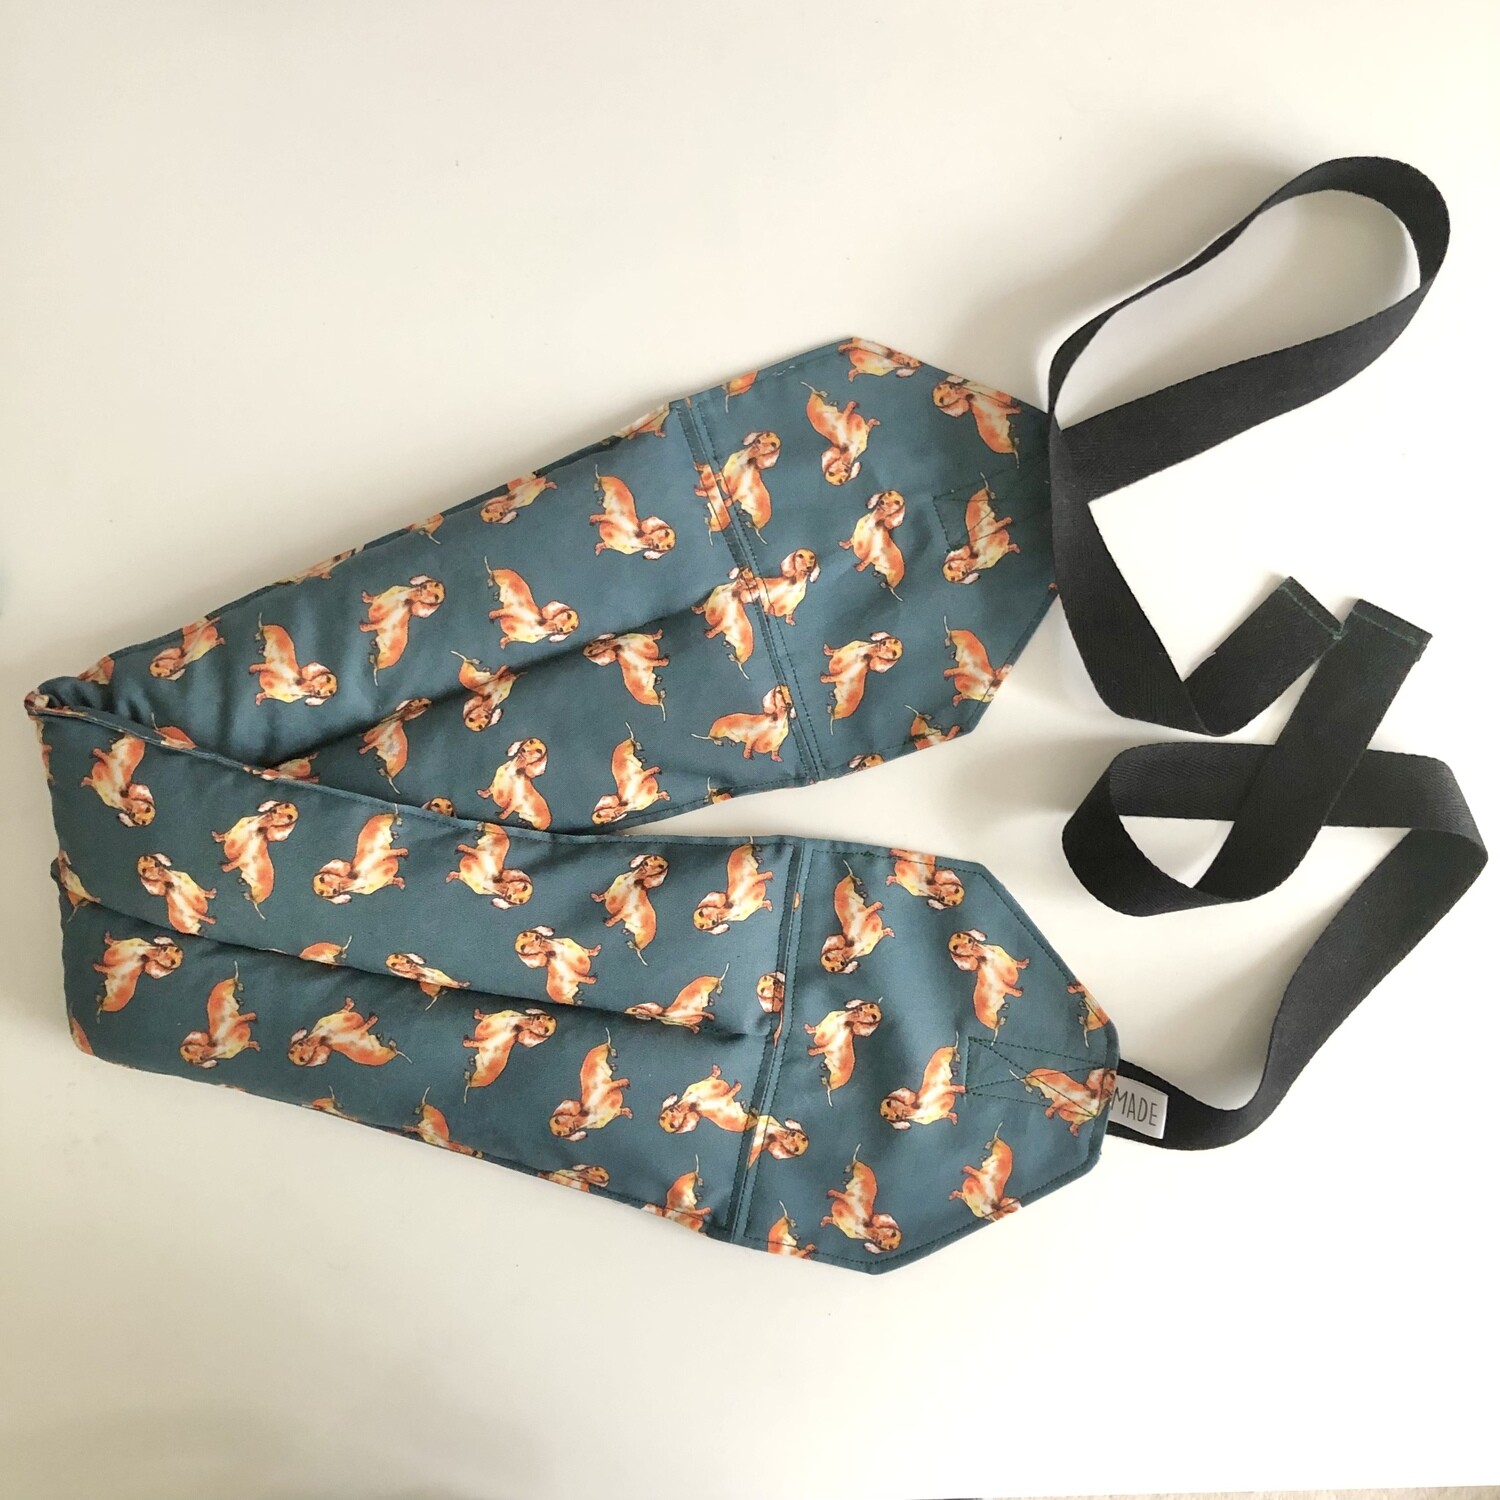 Little Sausage Dogs - Wheat Heat Bag - Super Size with Ties